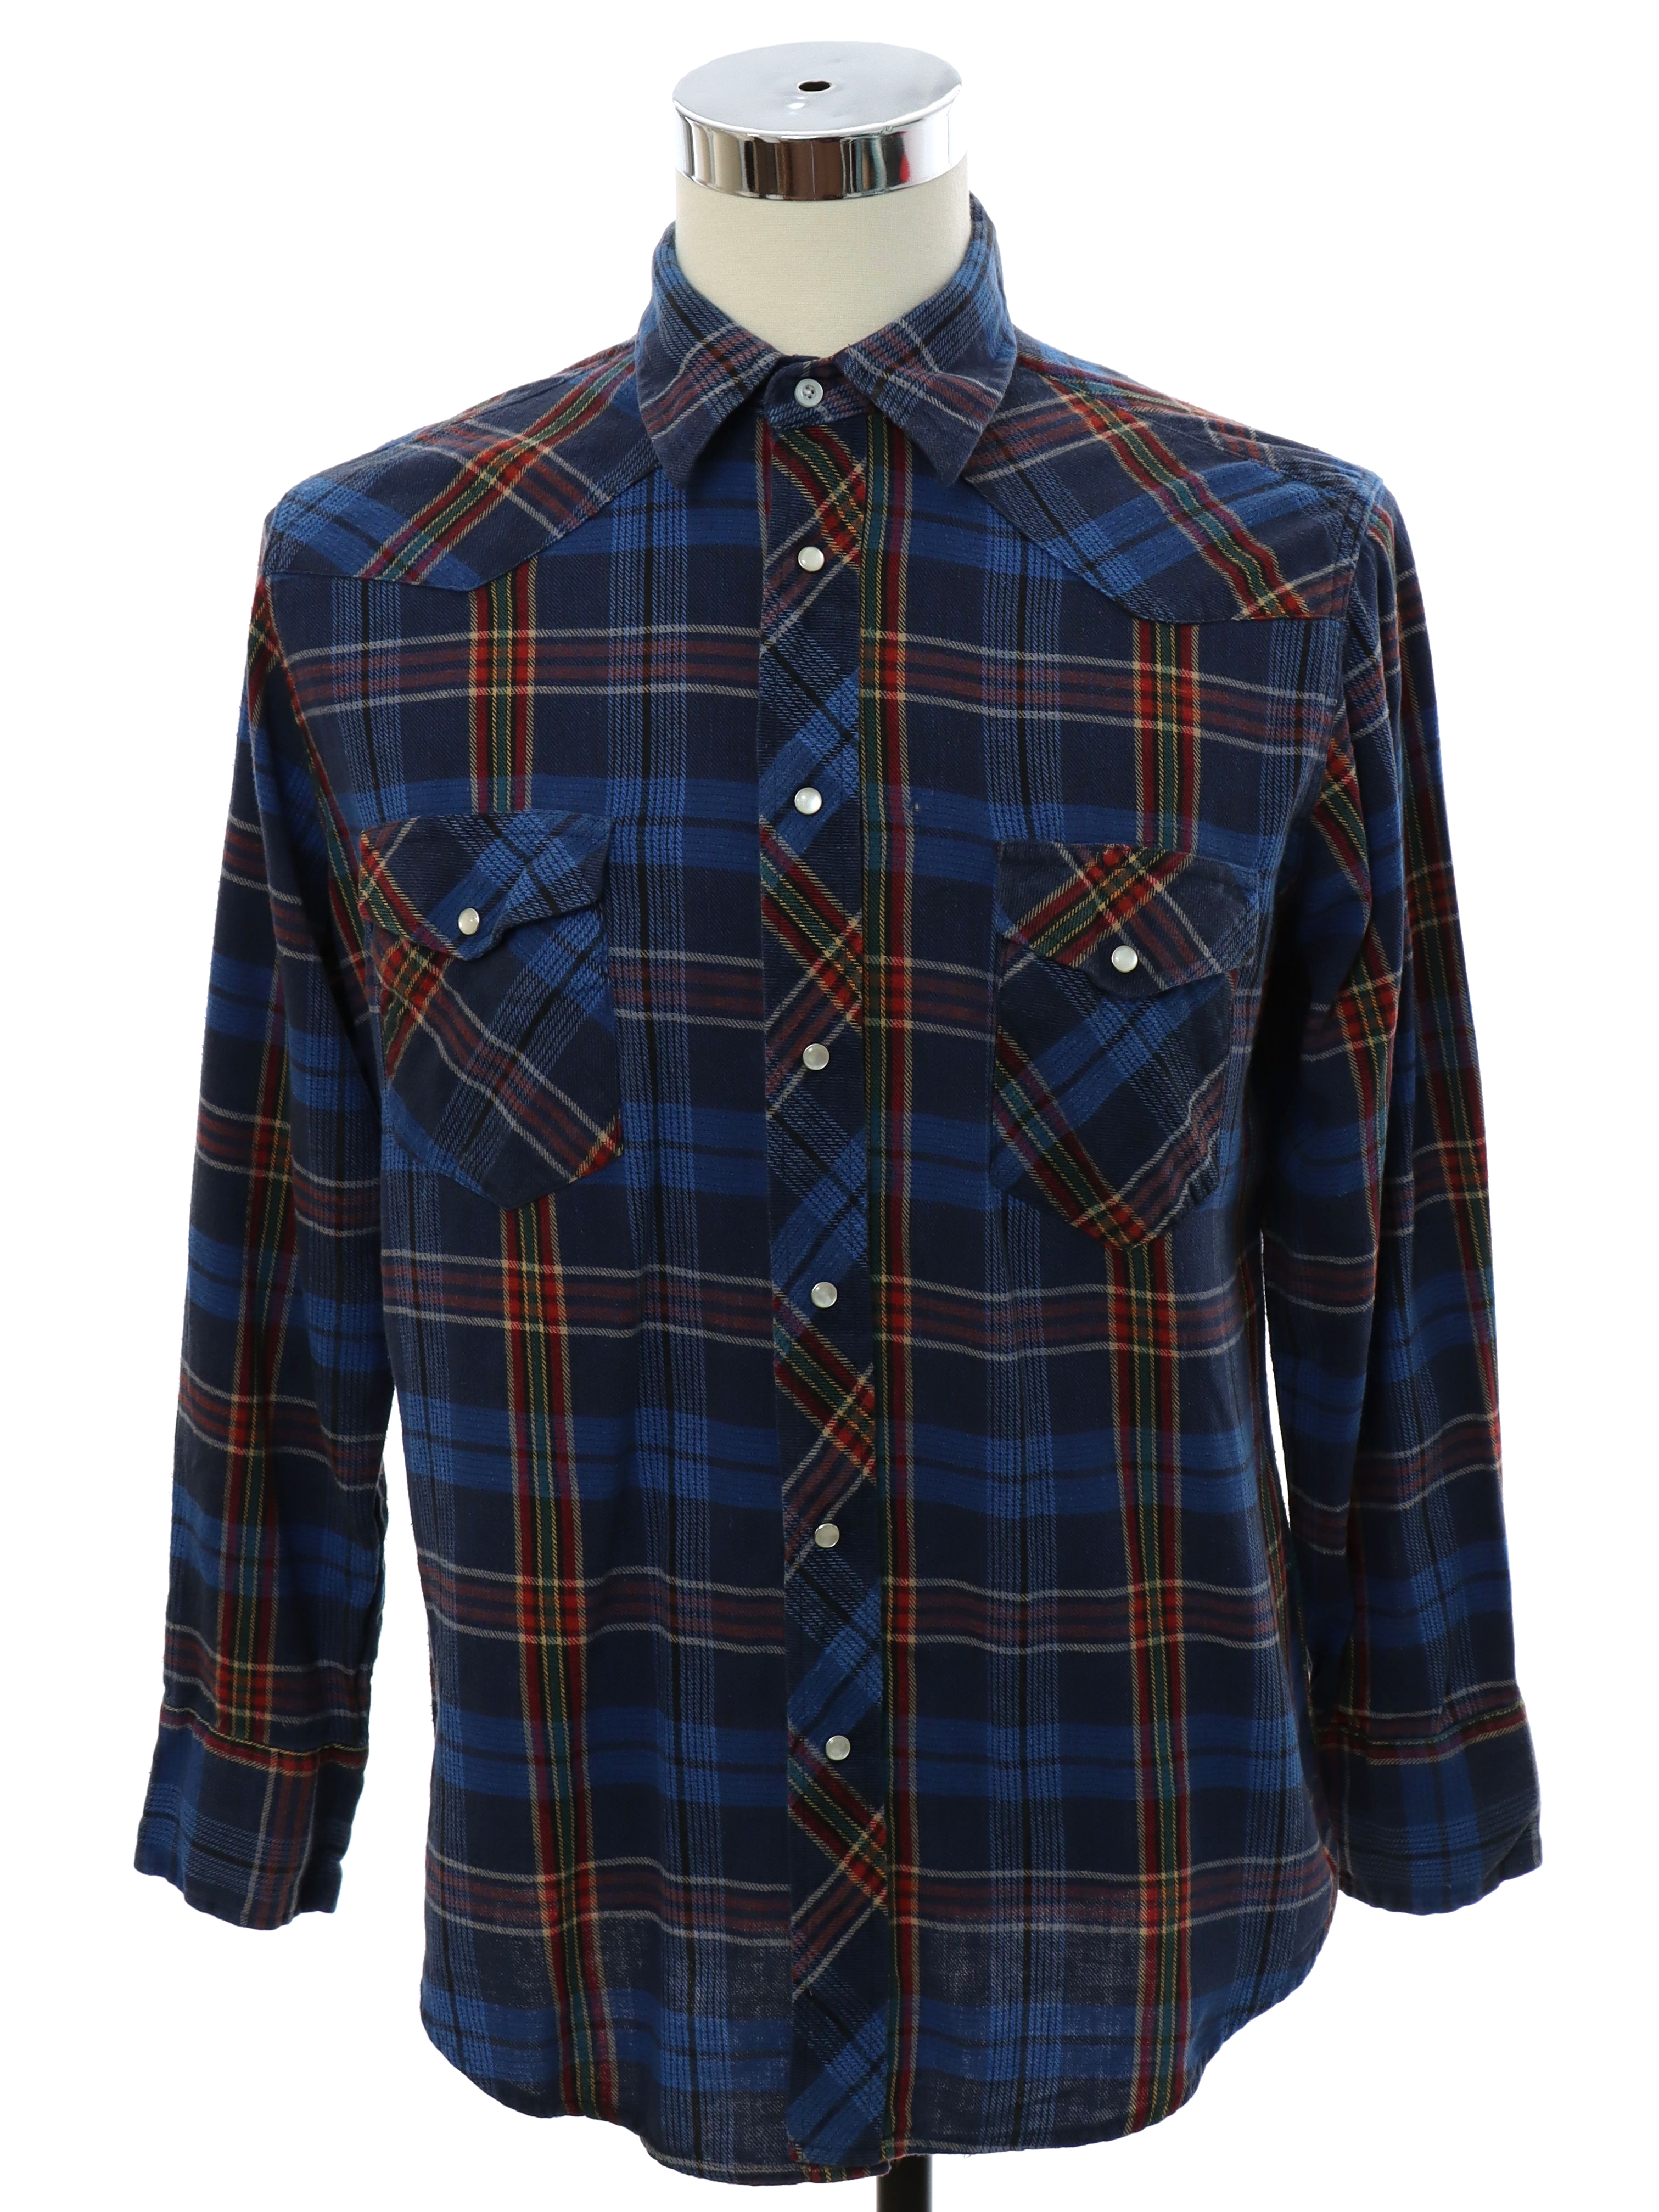 Western Shirt: 90s -Wrangler- Mens faded blue, navy, red, green, and yellow  plaid cotton flannel longsleeve flannel western shirt. (Made in Bangladesh)  pearlized snaps at front placket and cuffs. Fold over collar,